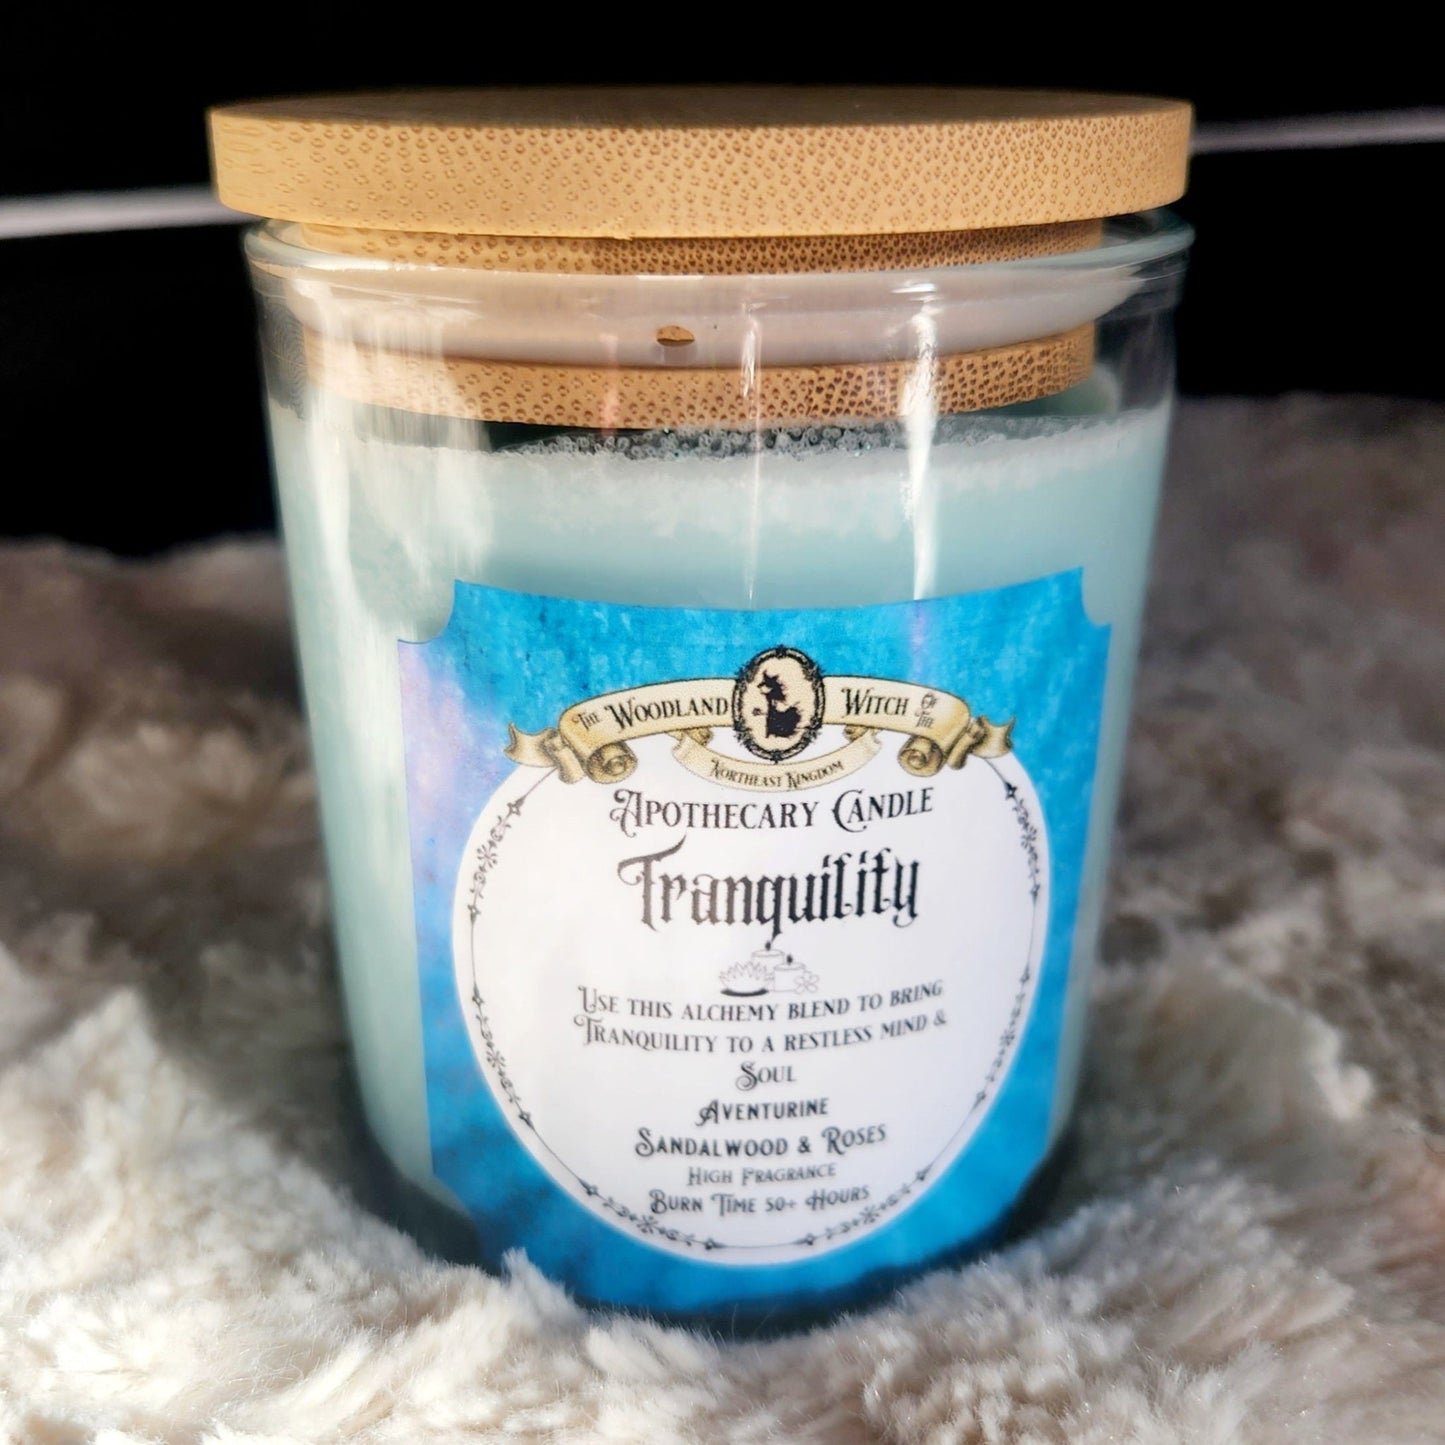 TRANQUILITY APOTHECARY CANDLE Woodland Witchcraft